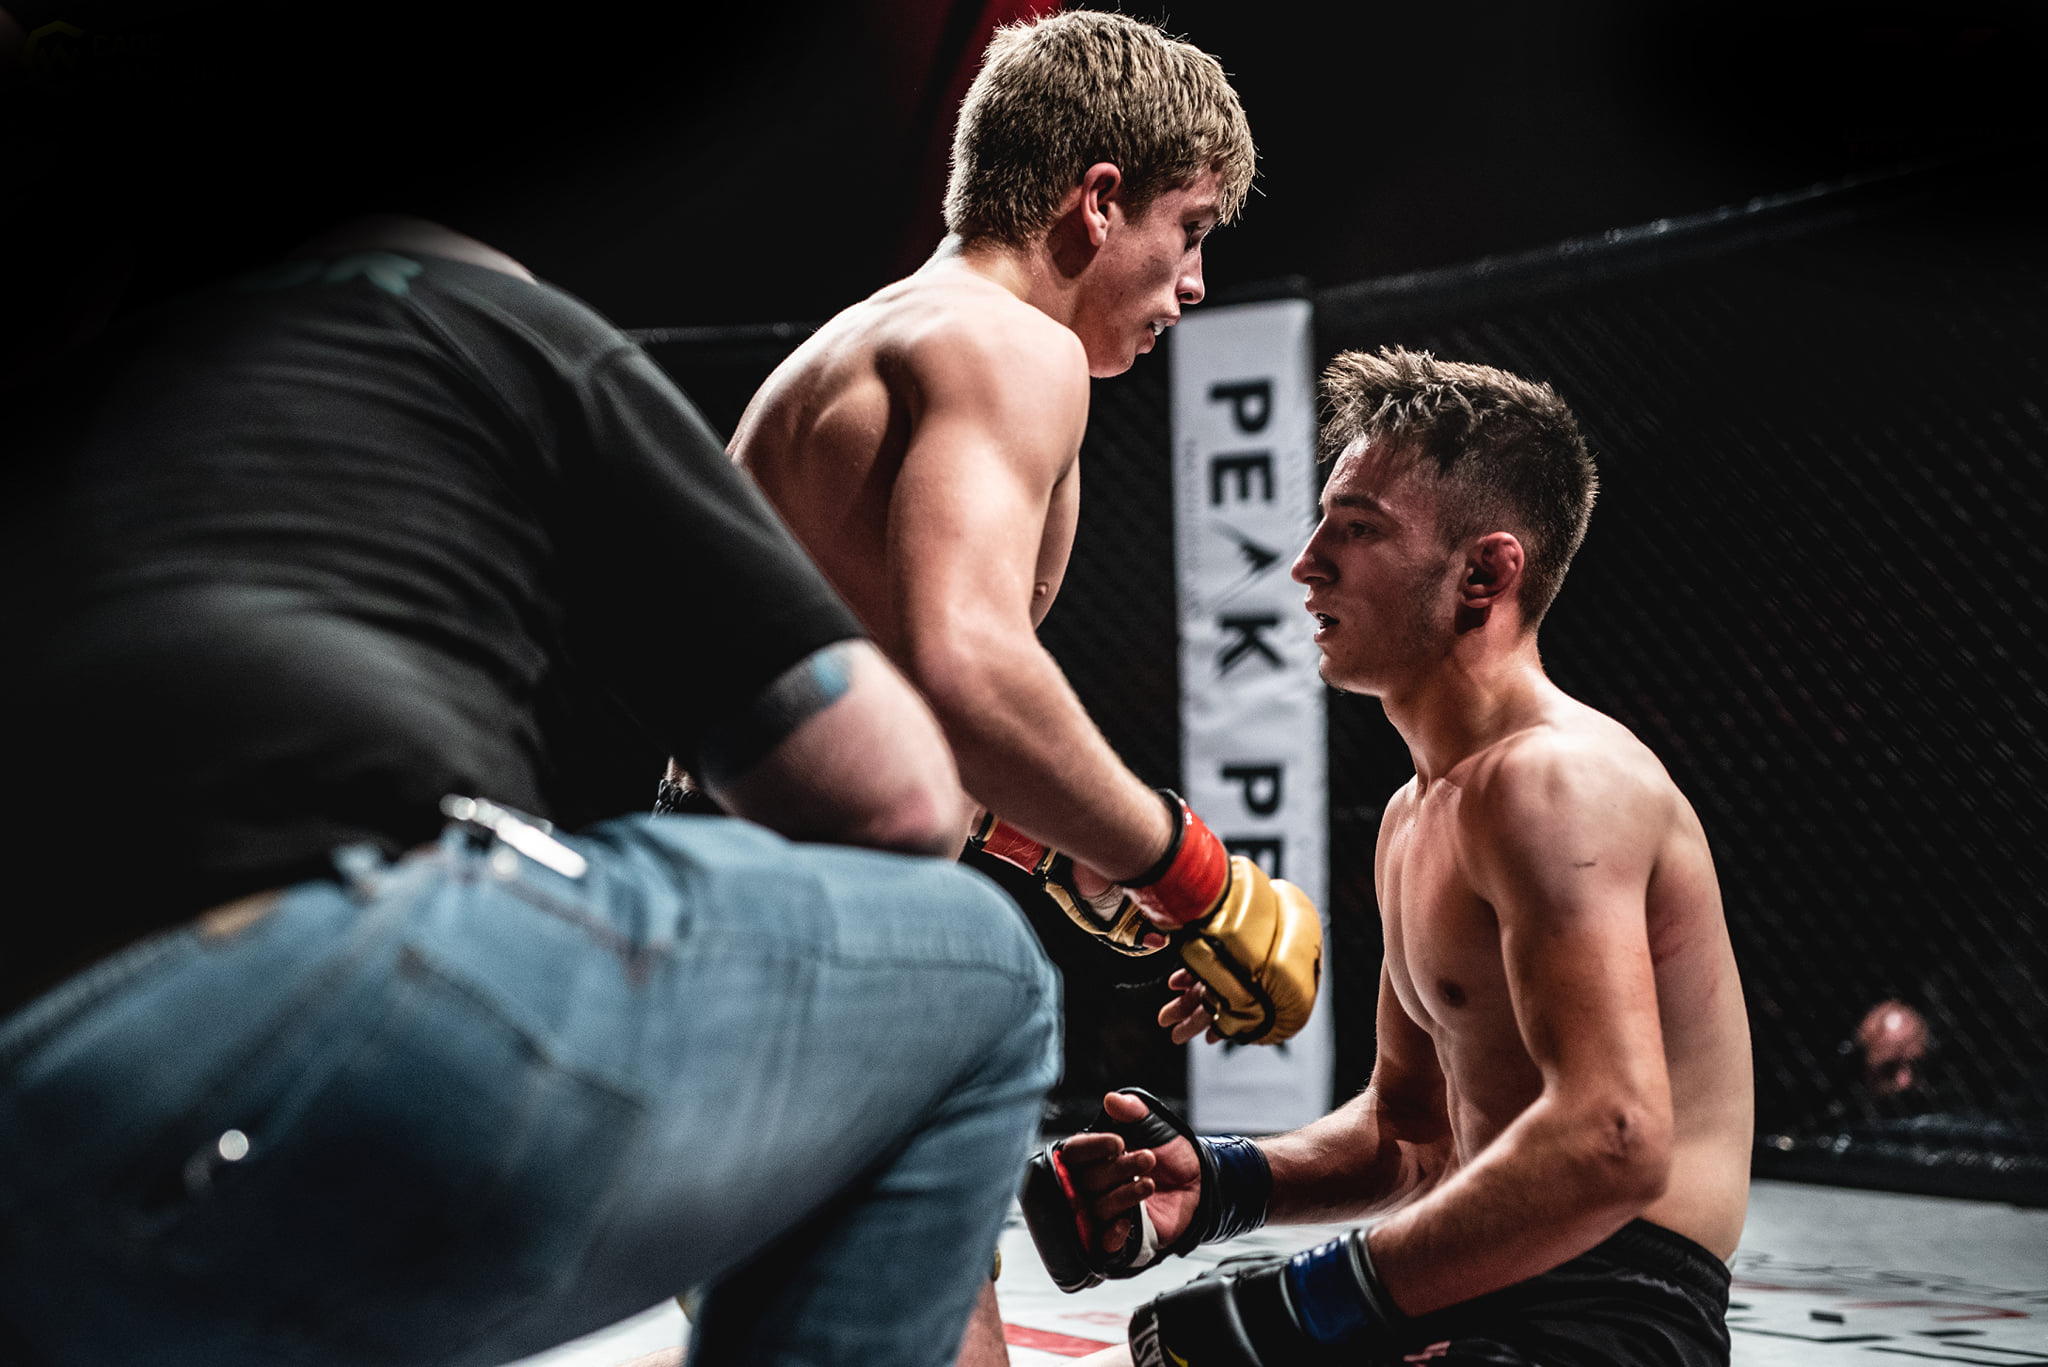 cage-warriors-south-east-24-results-cage-warriors-academy